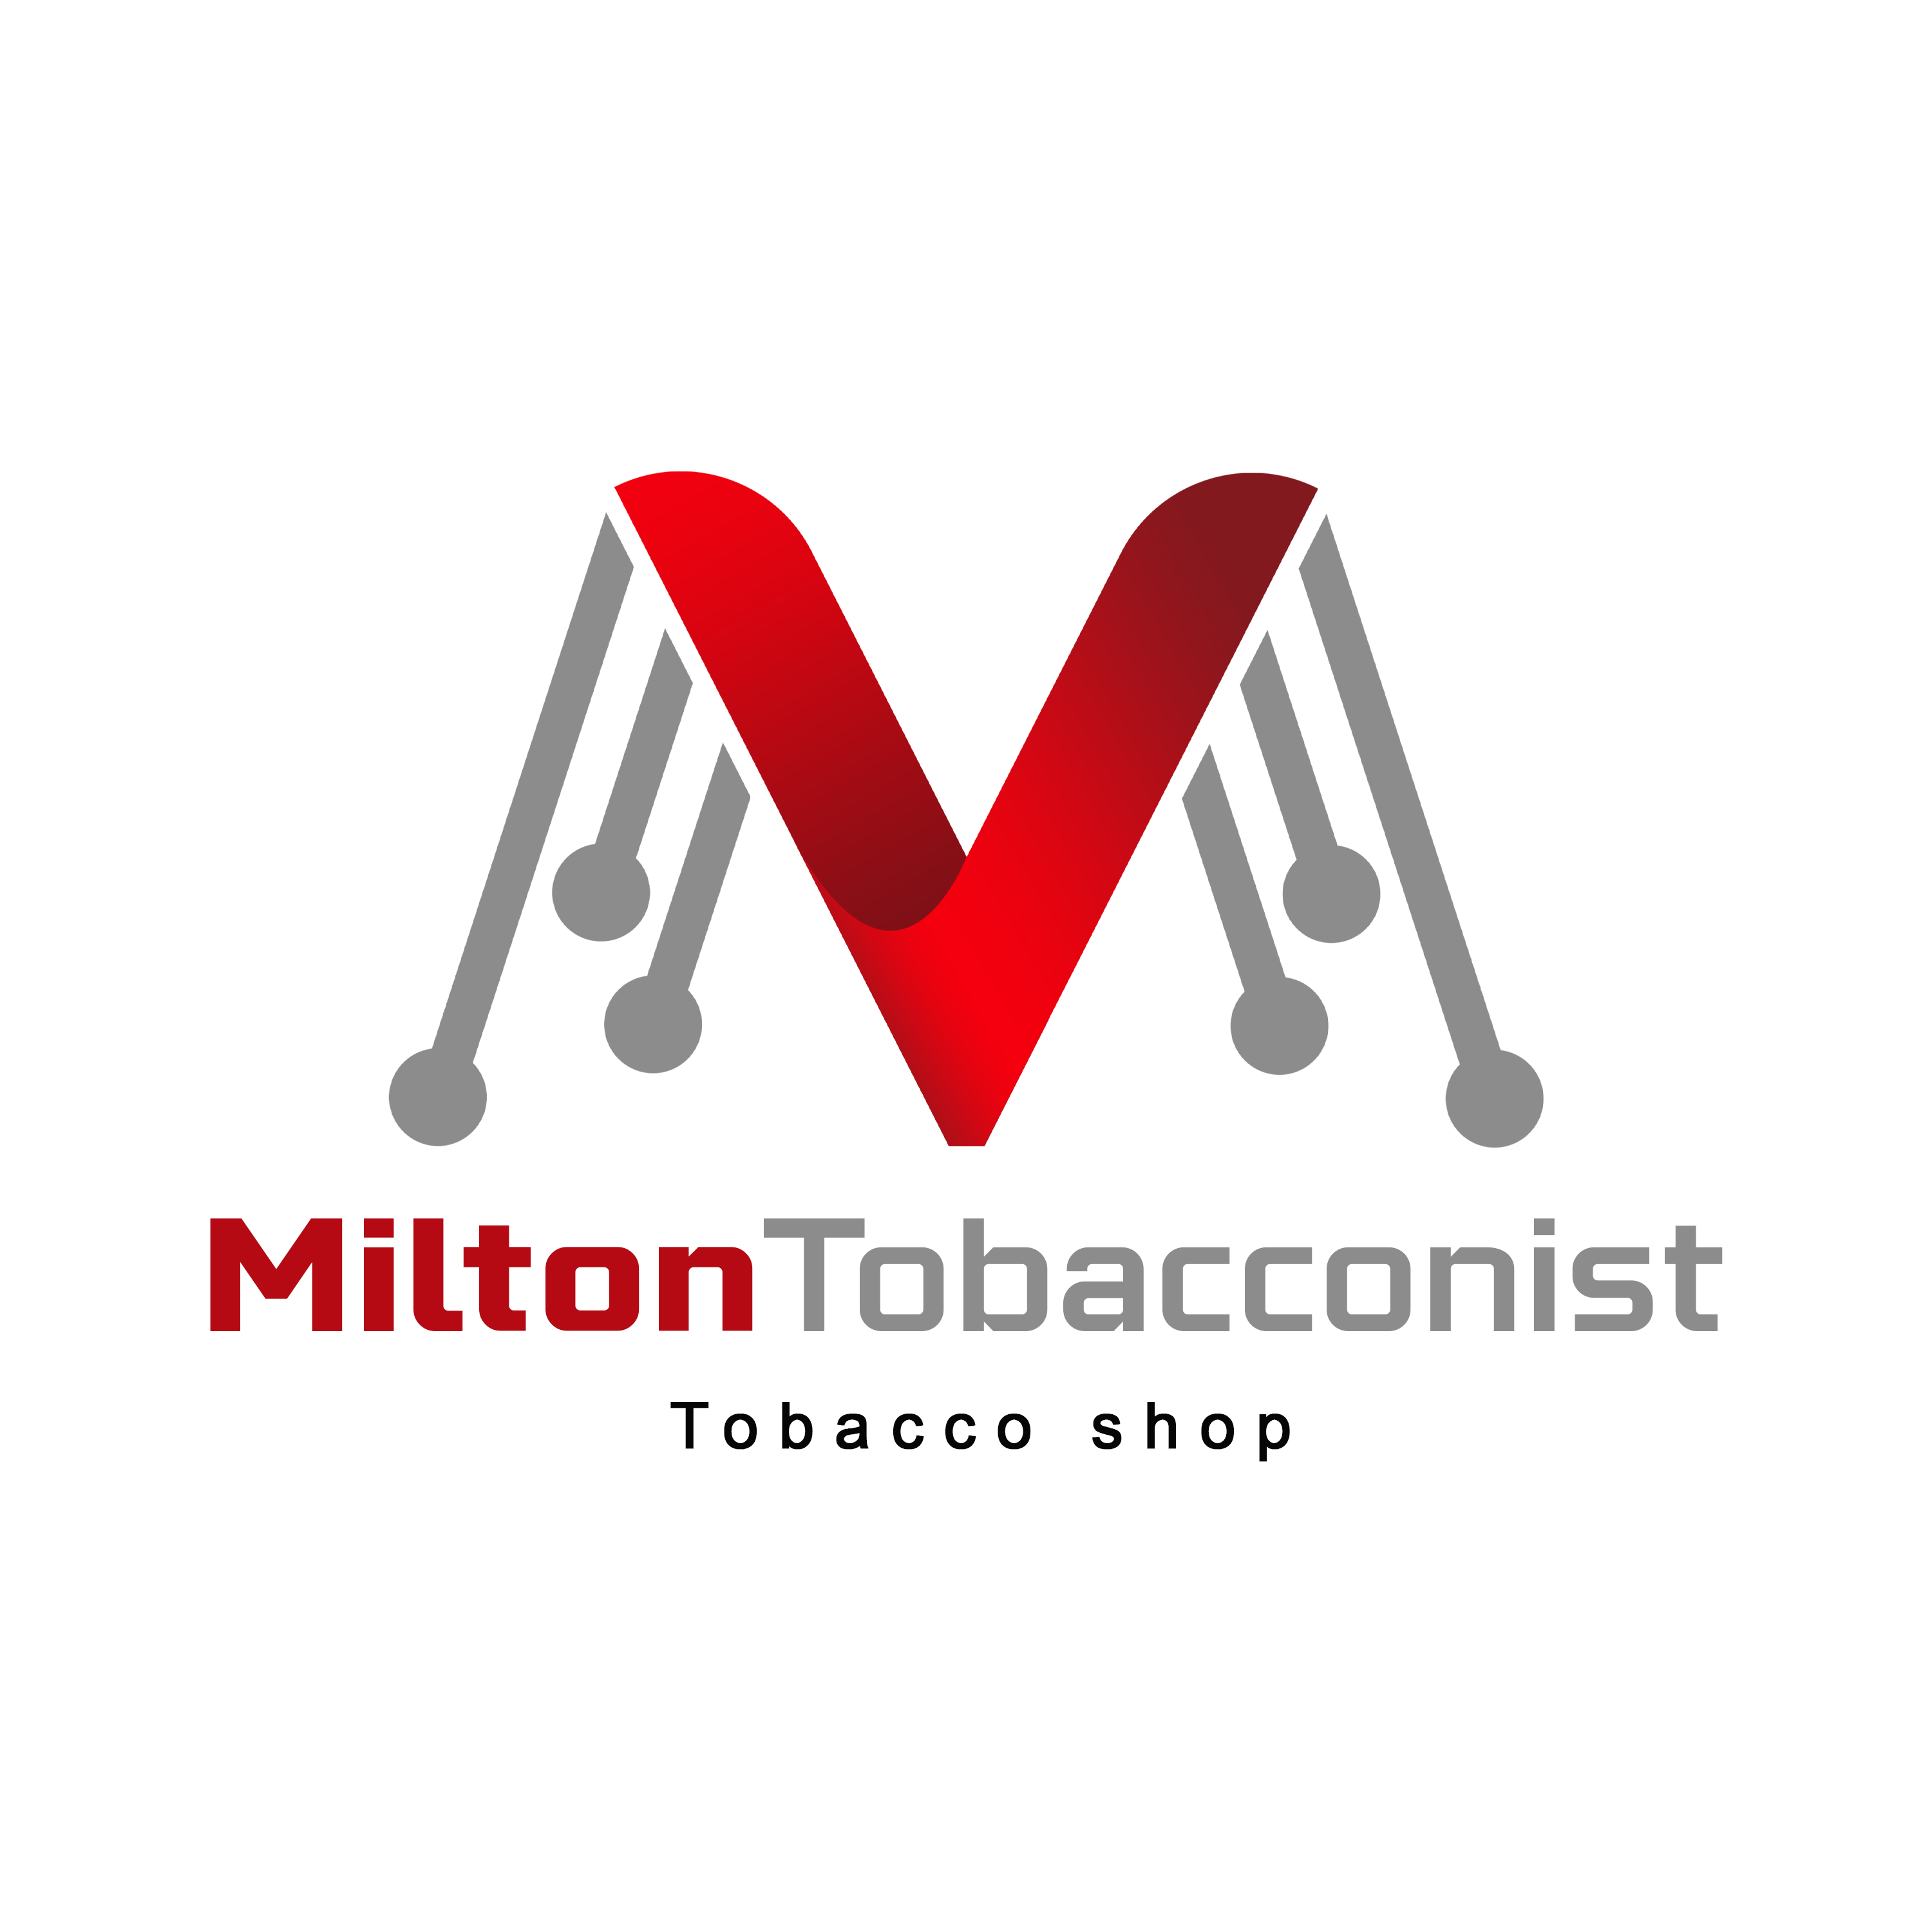 Milton Tobacconist (snacks &amp; gifts)'